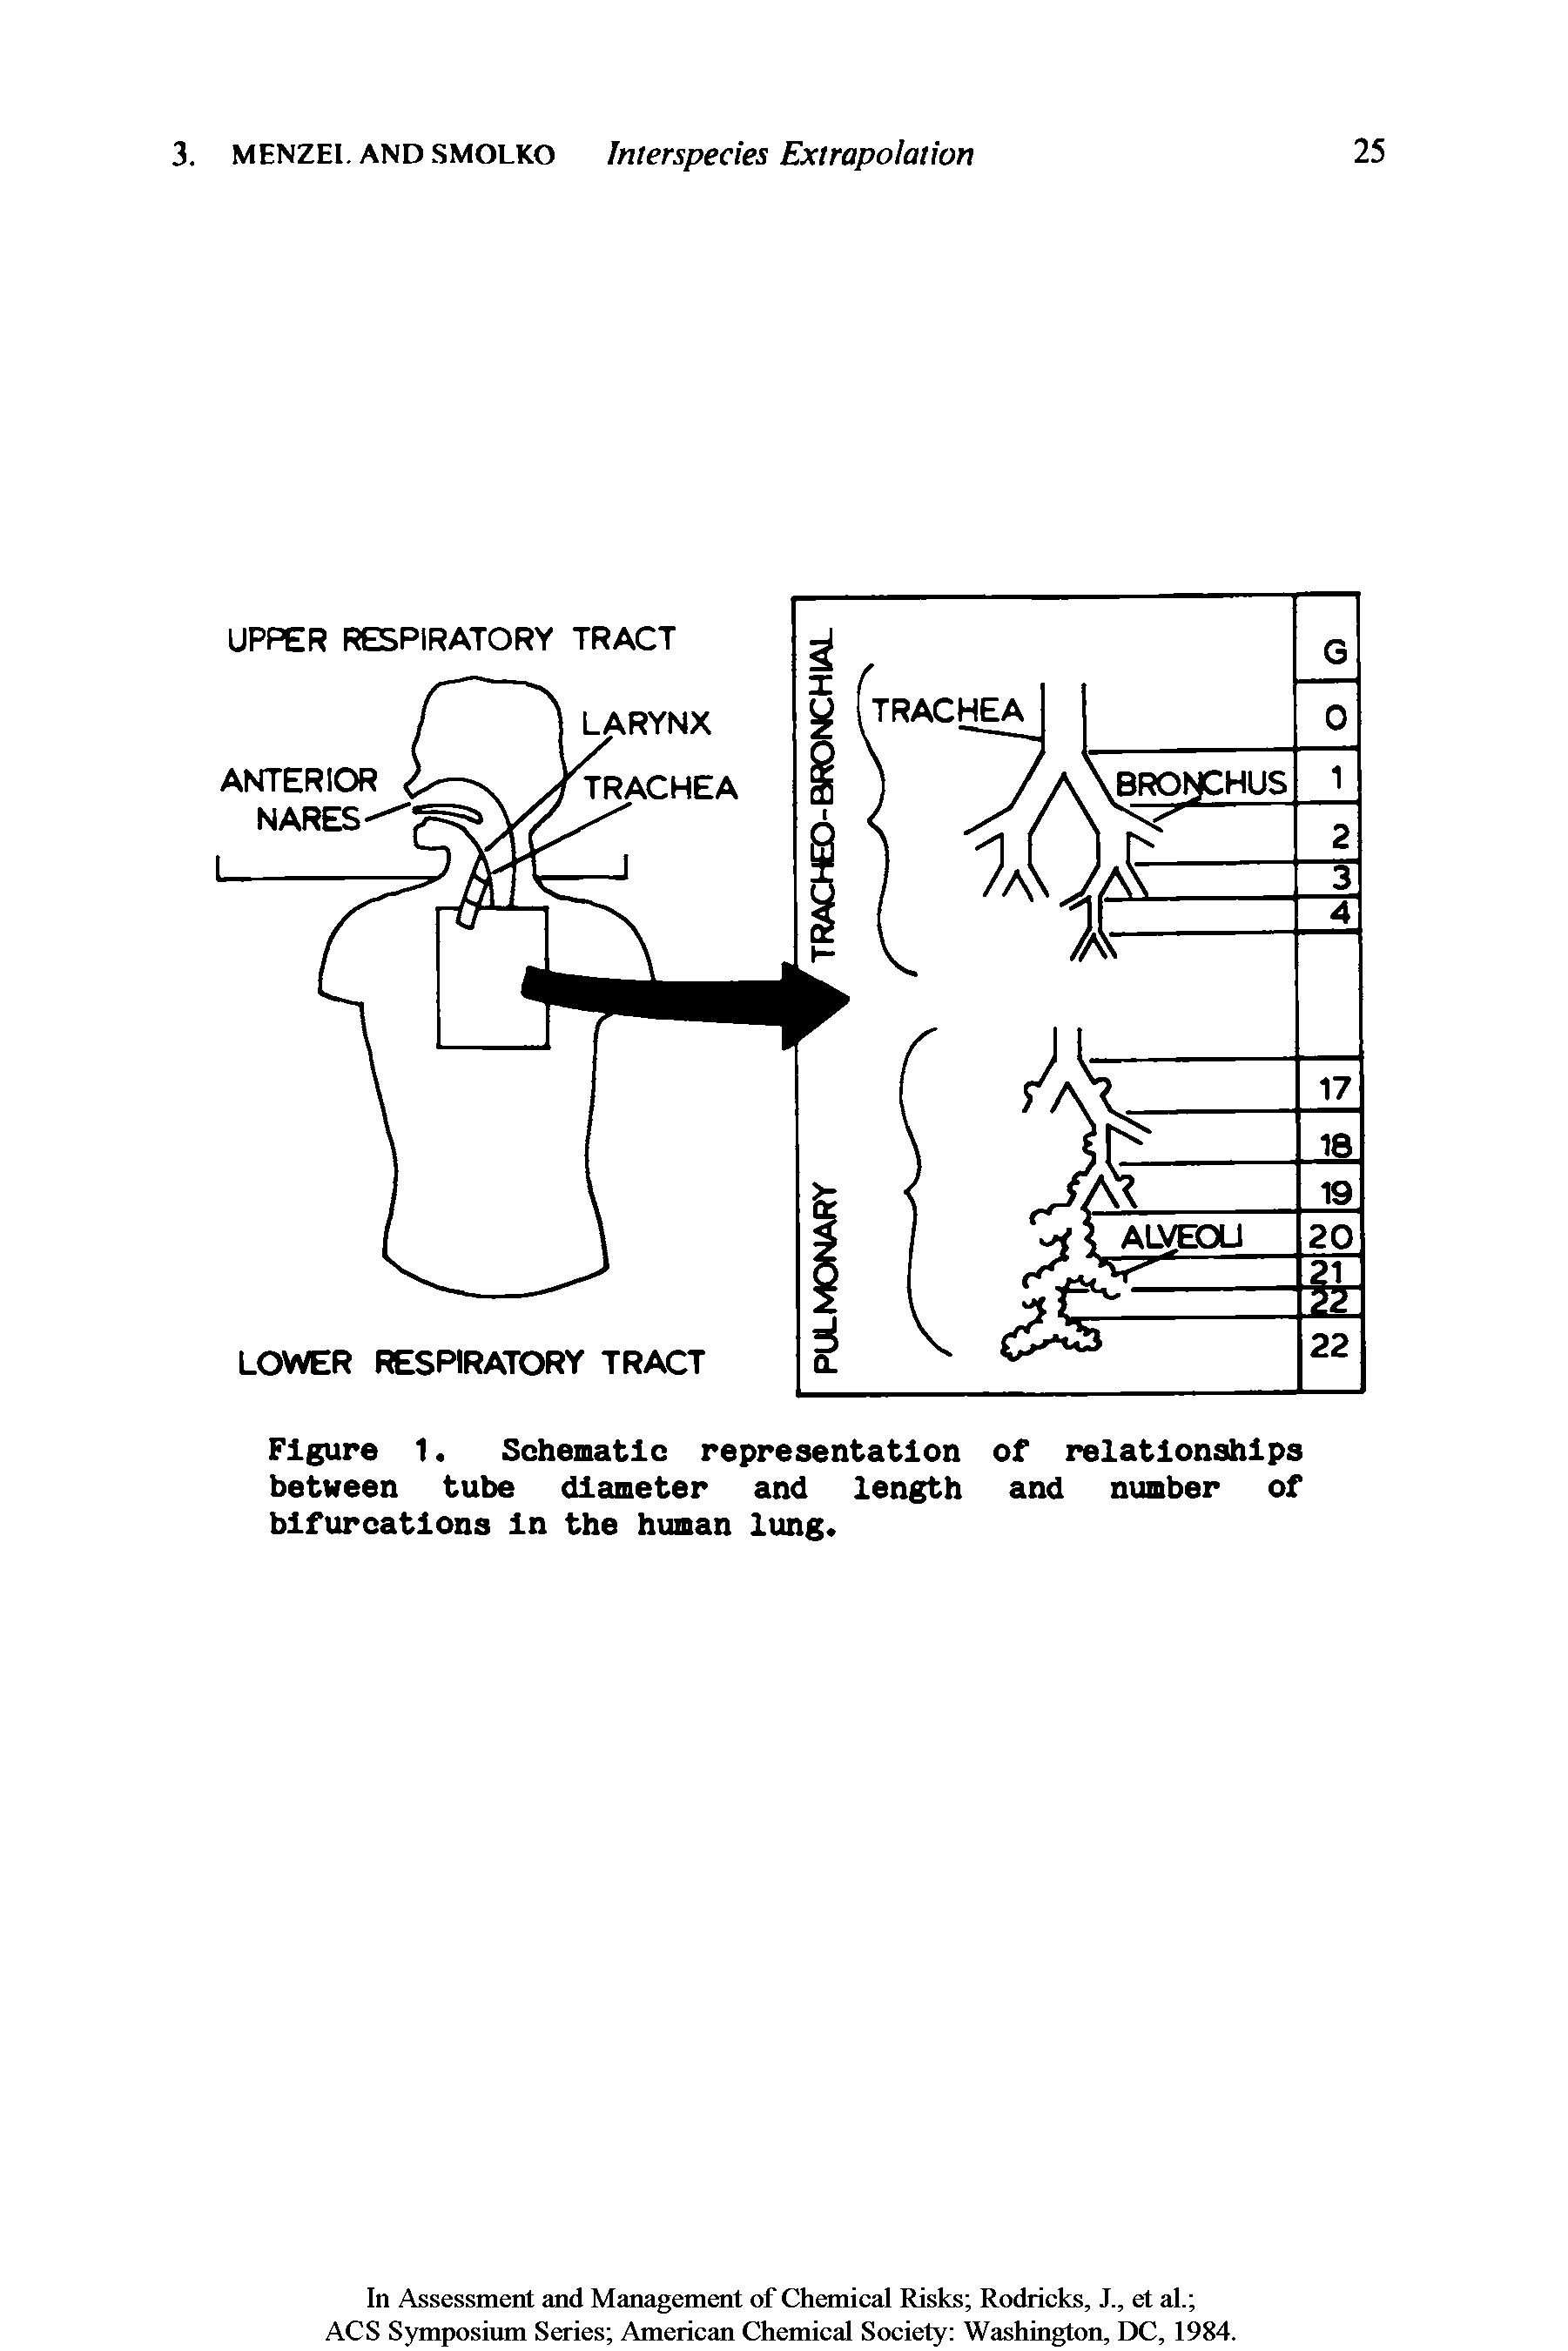 Figure 1. Schematic representation of relationships between tube diameter and length and number of bifurcations In the human lung.